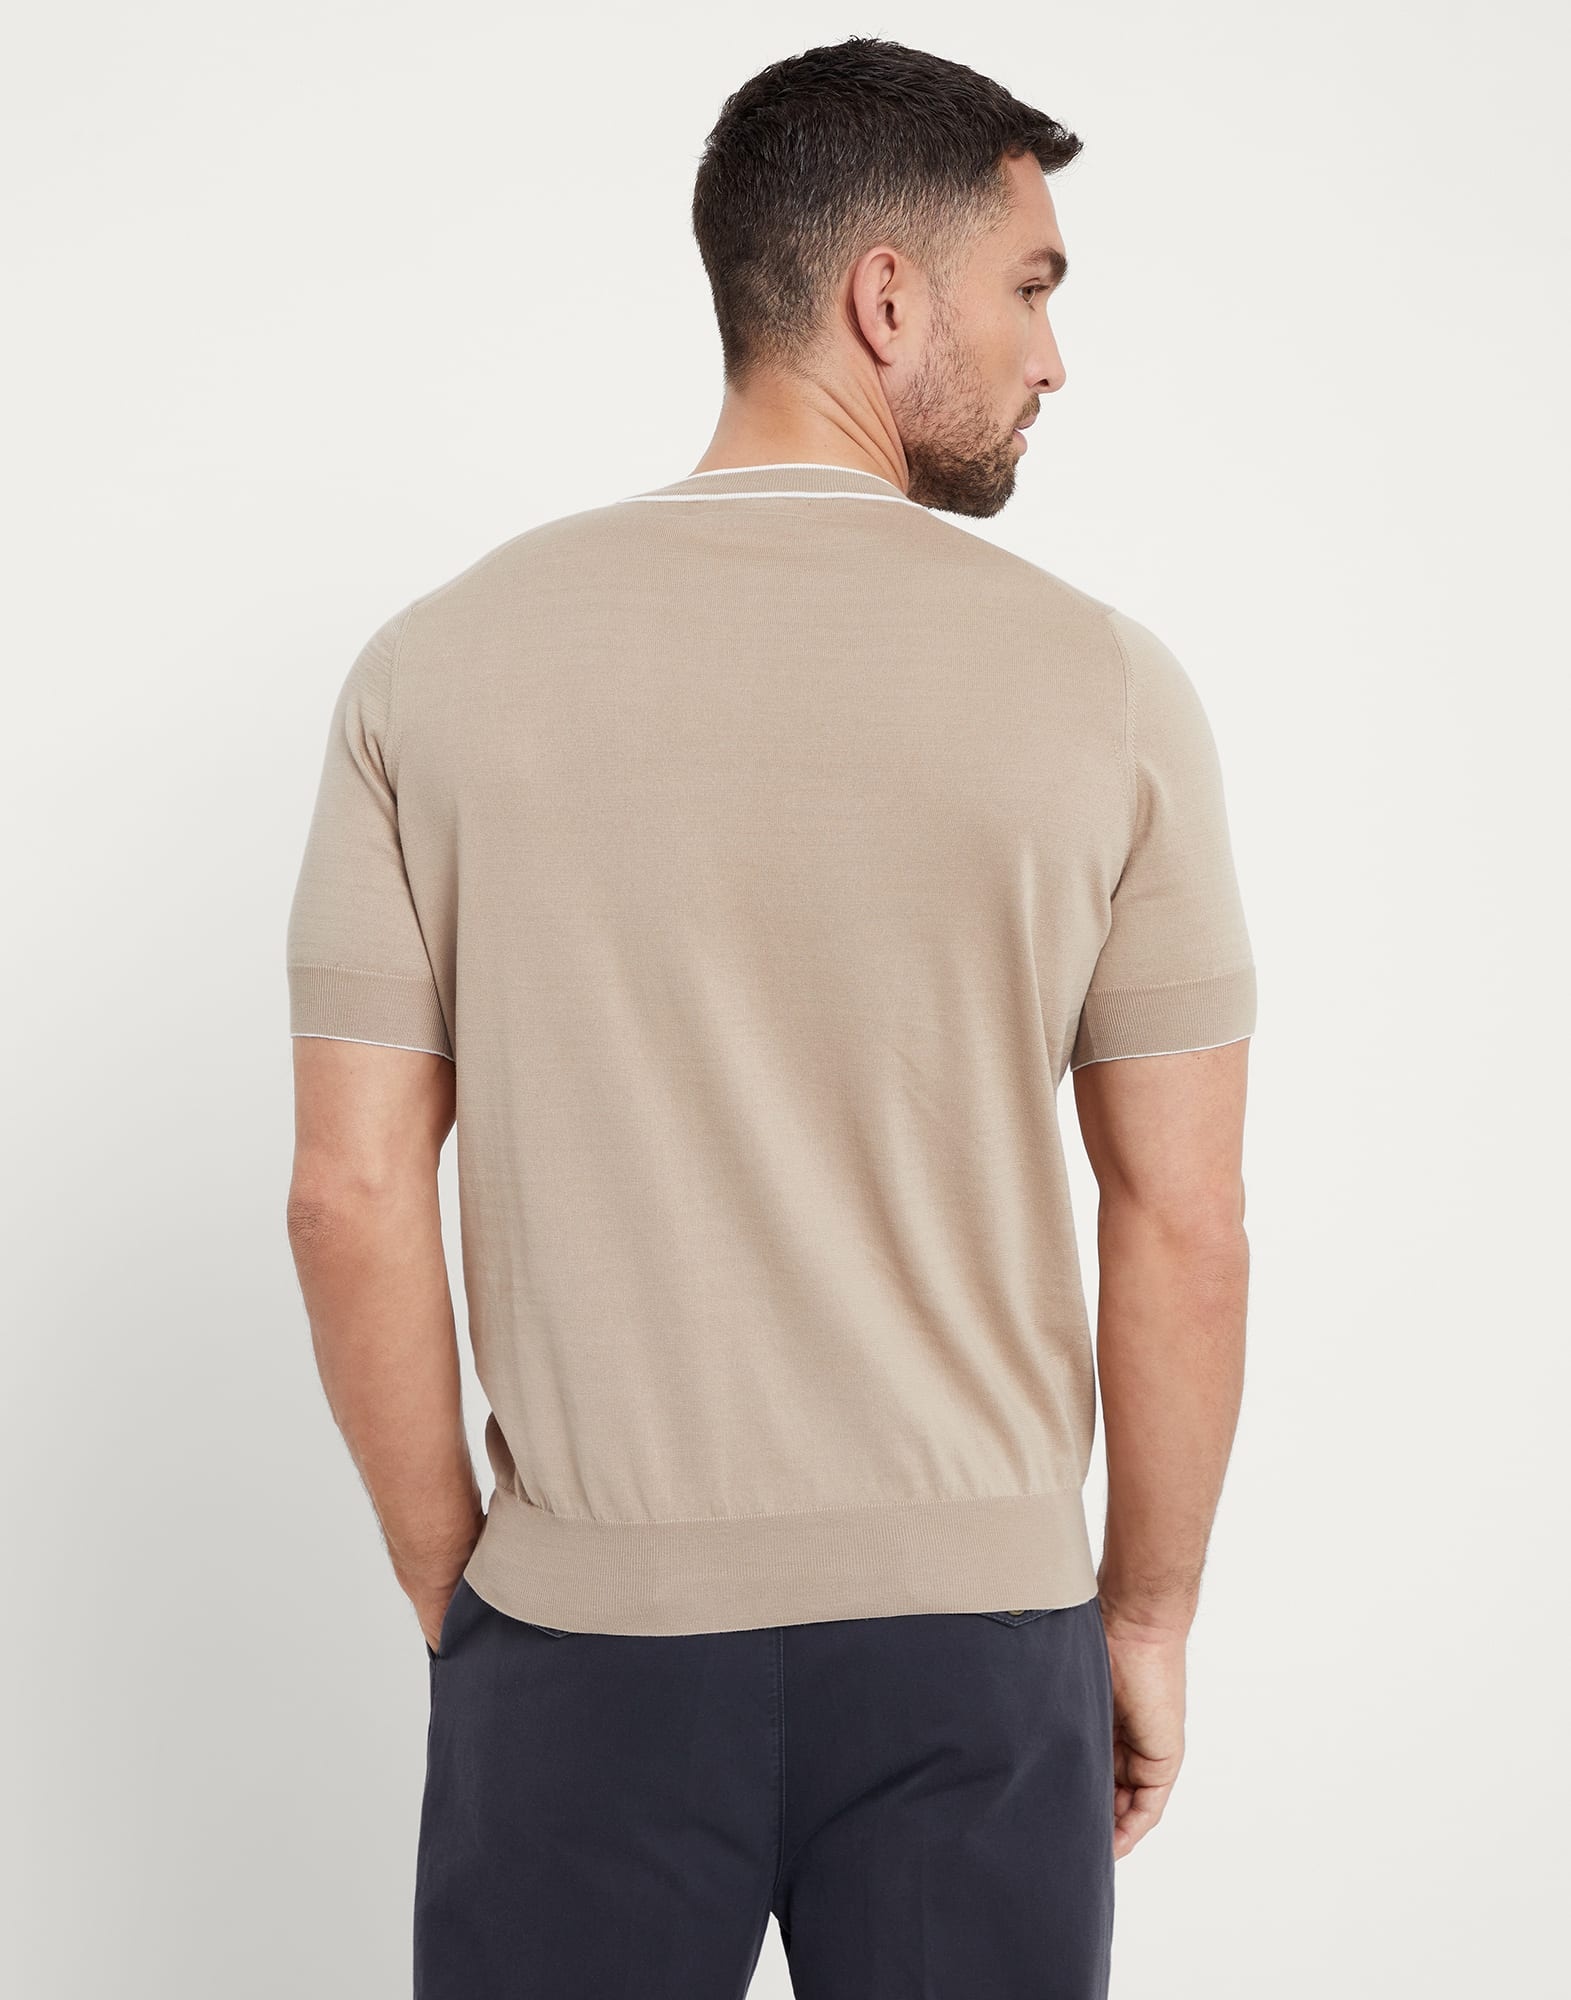 Cotton lightweight knit T-shirt with contrast details - 2